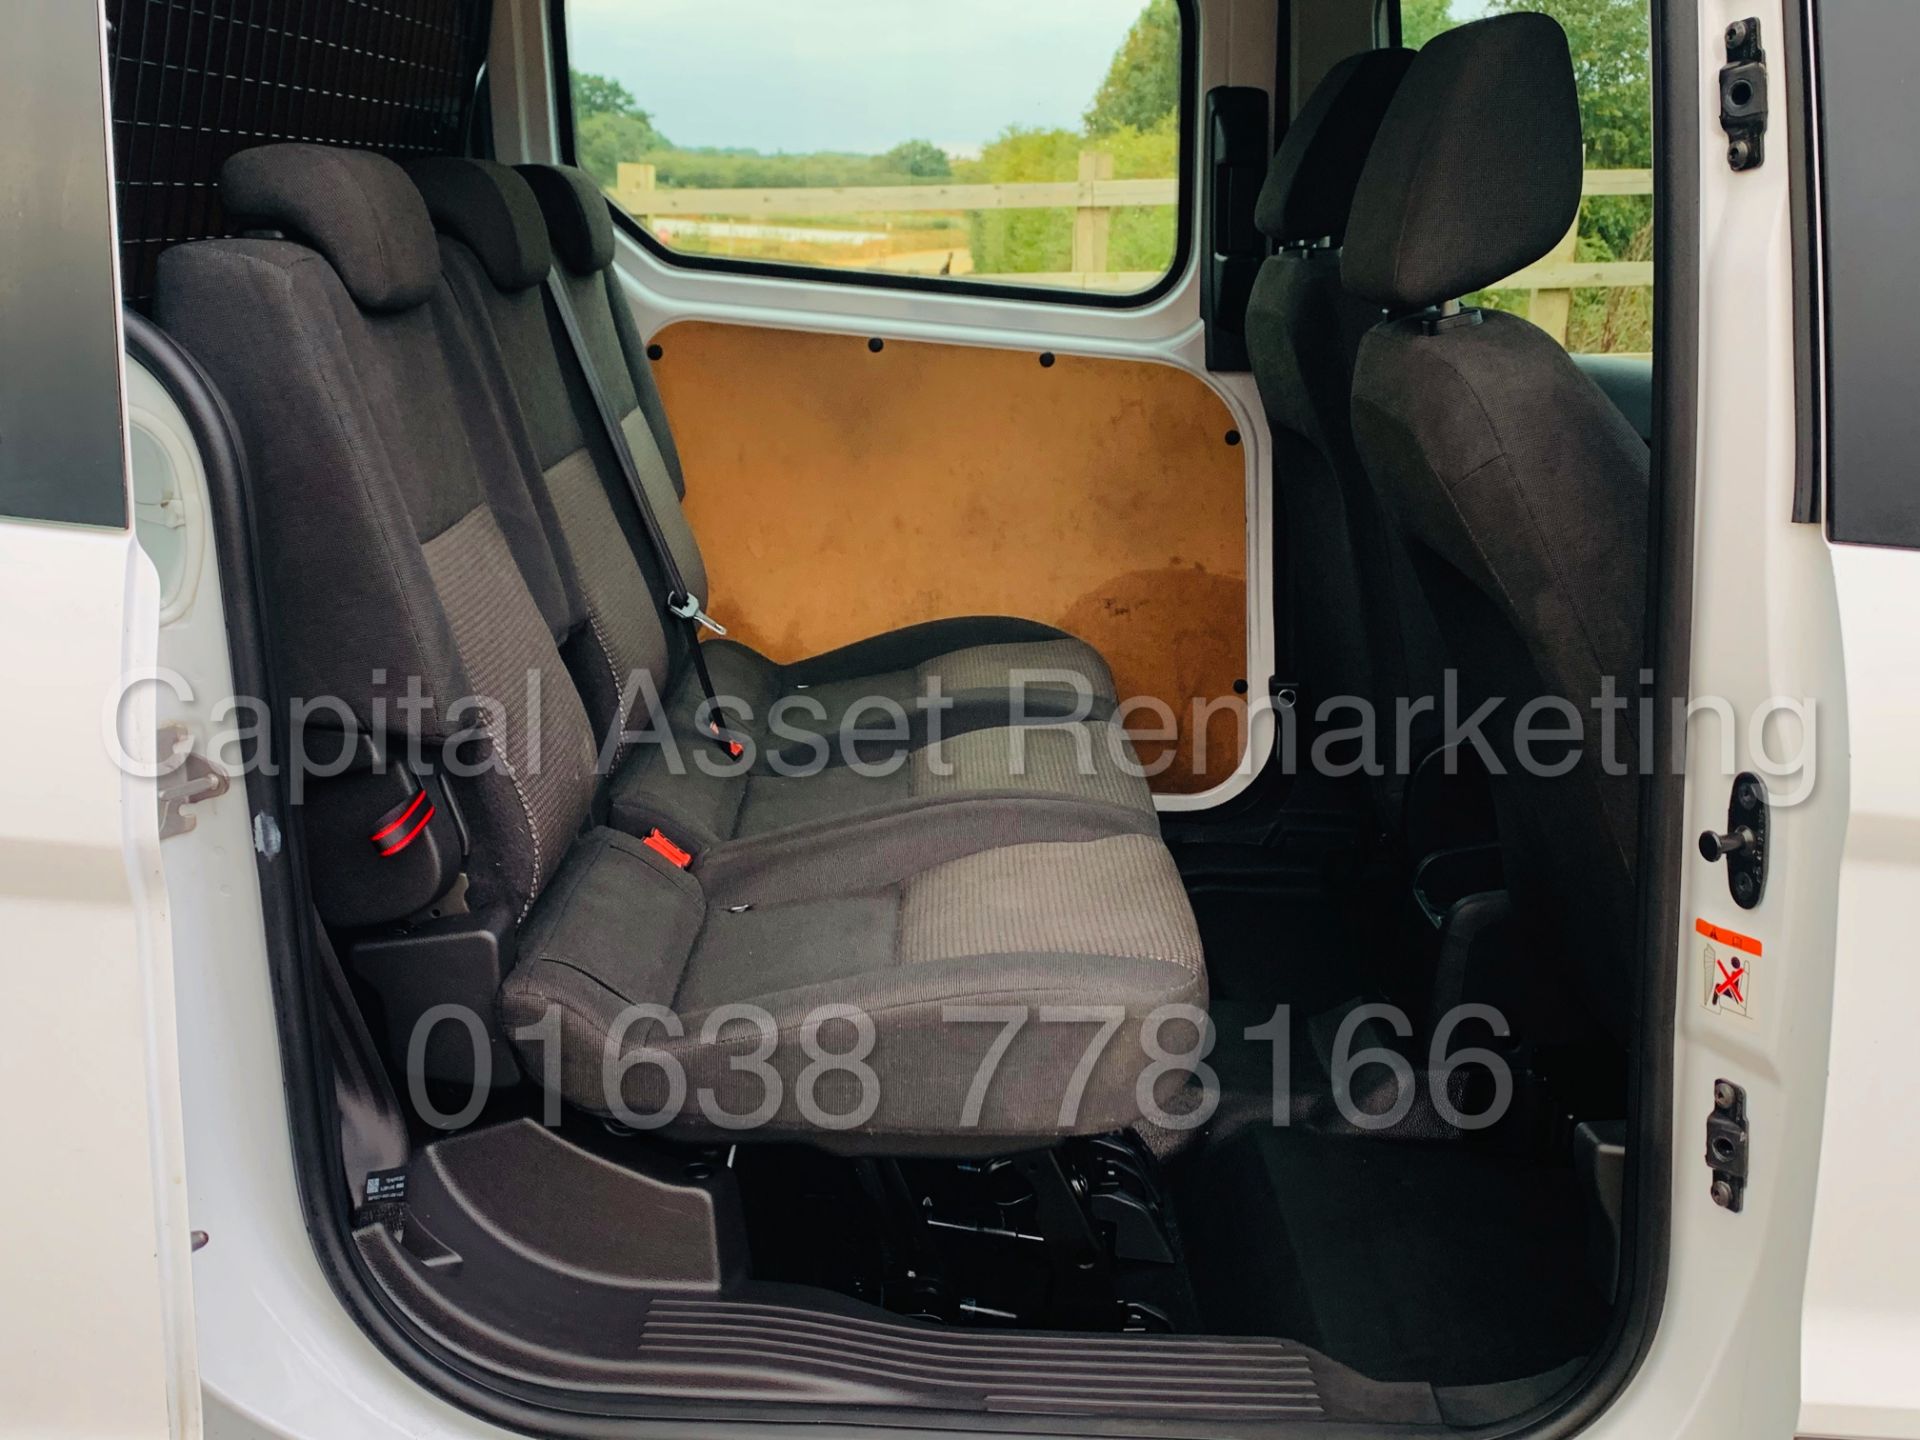 ON SALE FORD TRANSIT CONNECT *LWB- 5 SEATER CREW VAN* (2018 - EURO 6) 1.5 TDCI *AIR CON* (1 OWNER) - Image 27 of 45